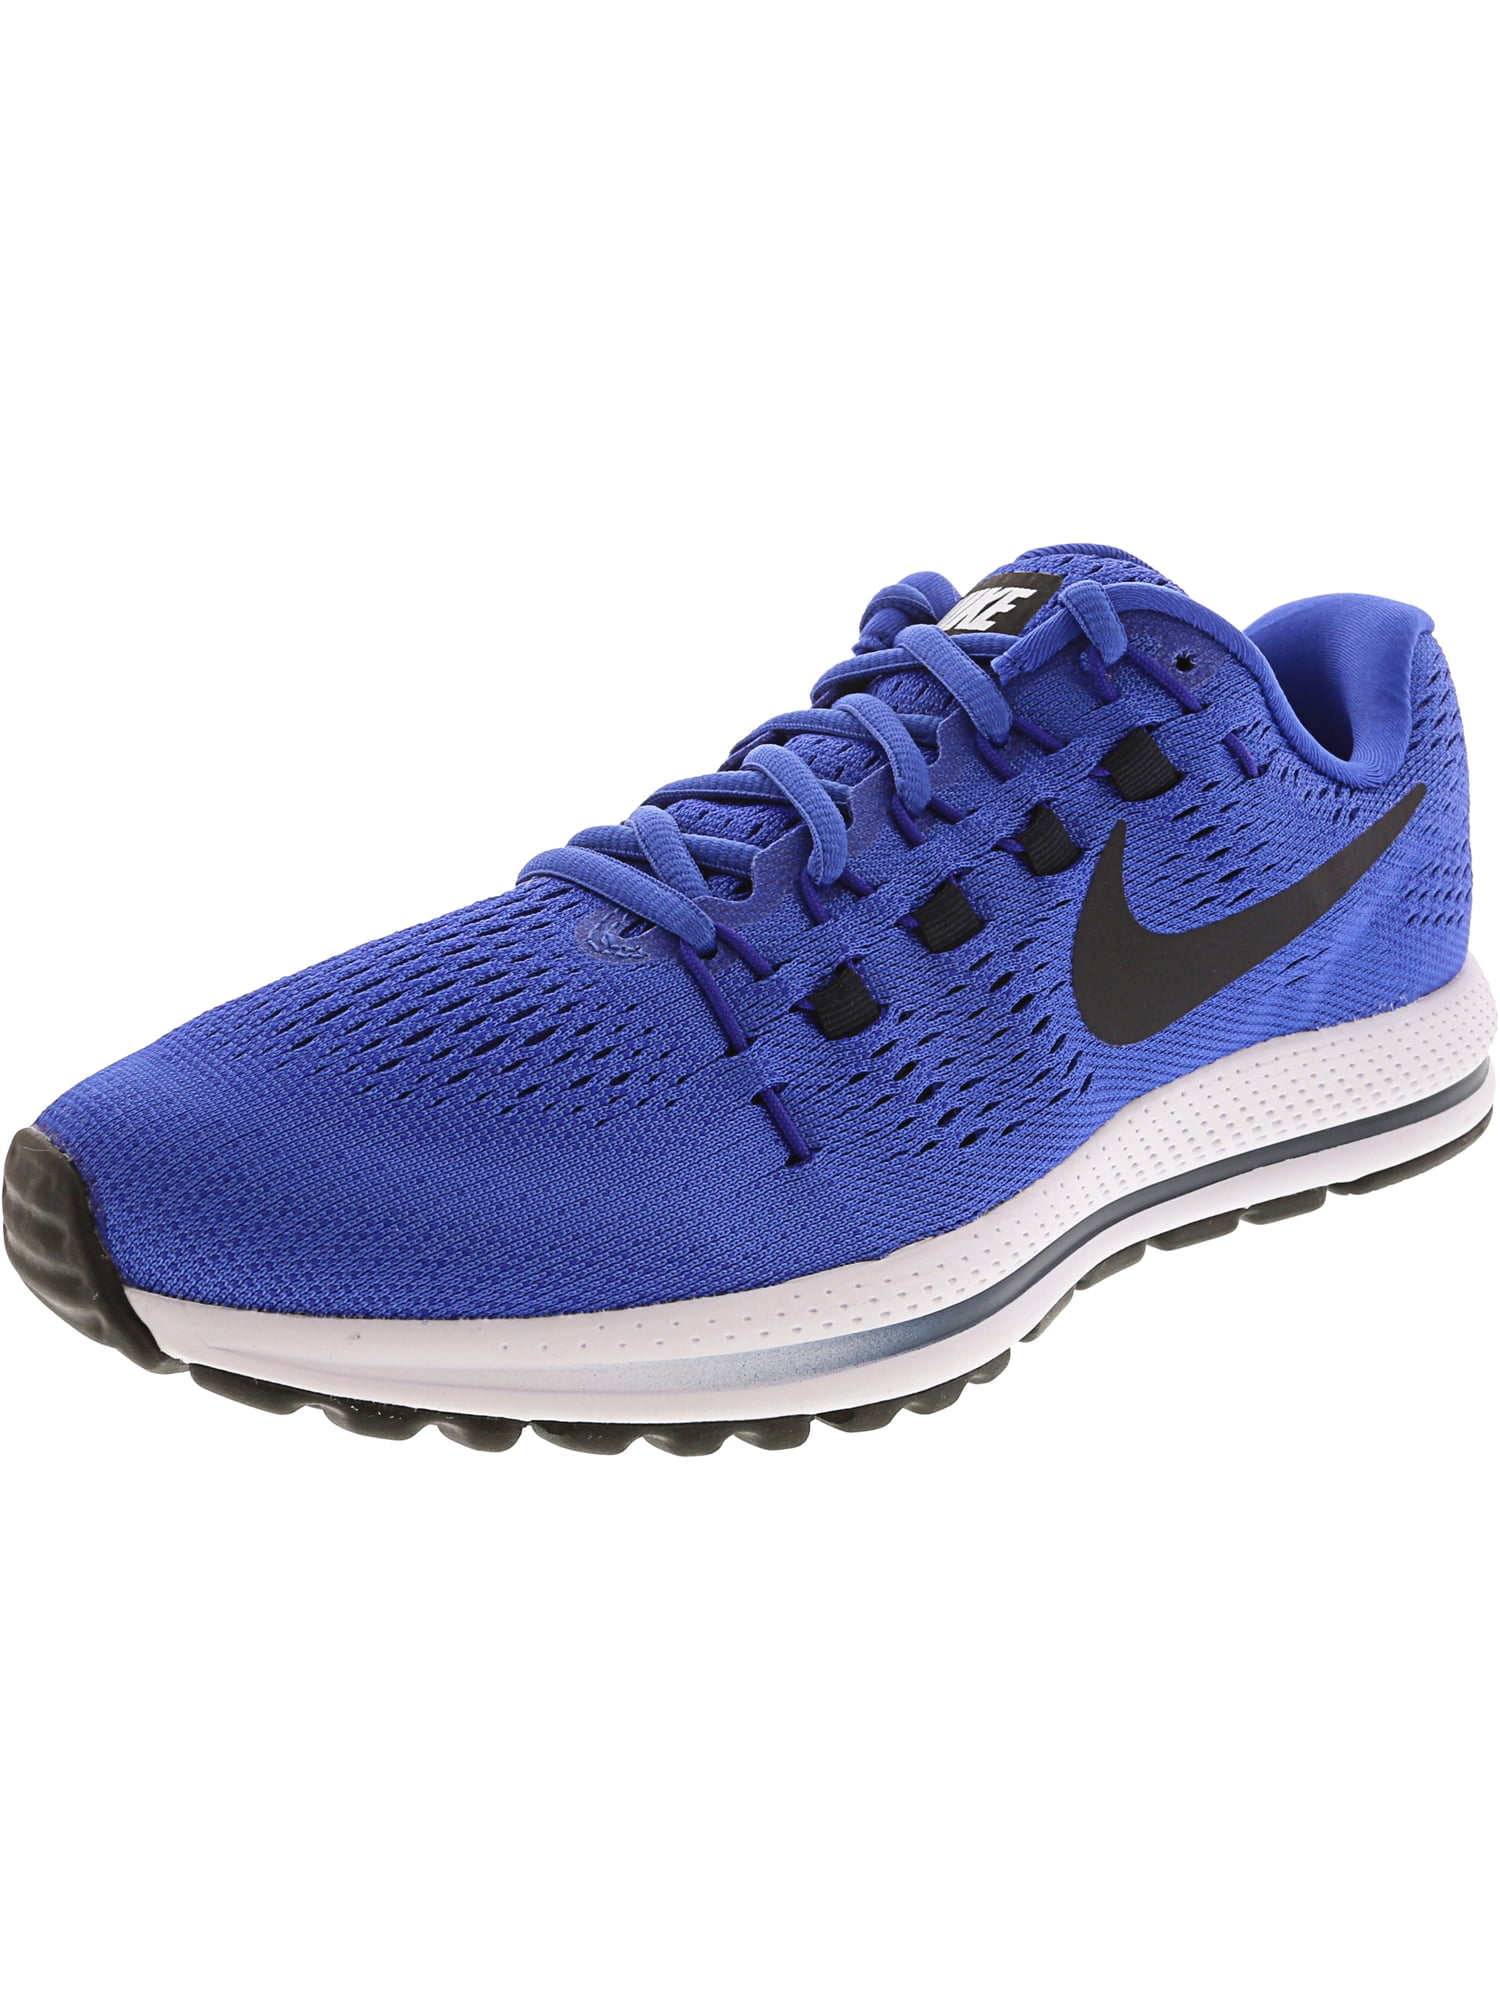 Nike Men's Air Zoom Vomero 12 Mega Blue / Obsidian - Concord Ankle-High Running 10M -